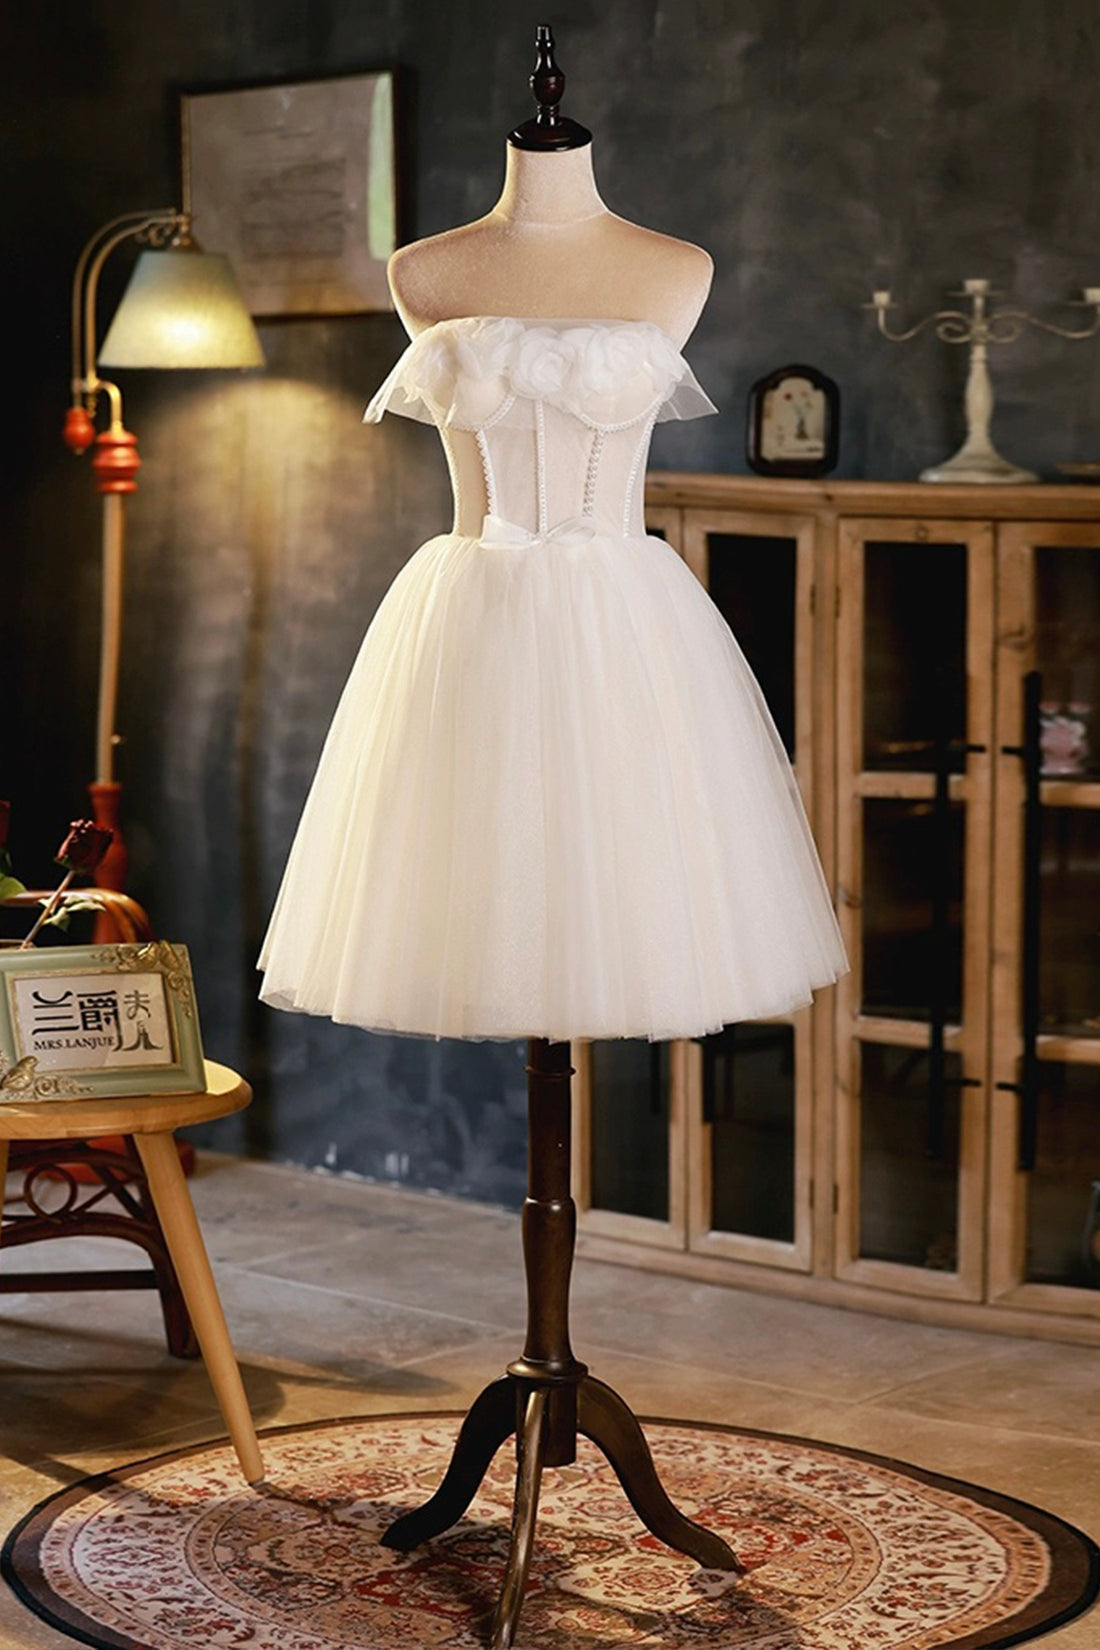 Light Champagne Strapless Tulle Short Prom Dress with 3D Flowers, Cute A-Line Party Dress